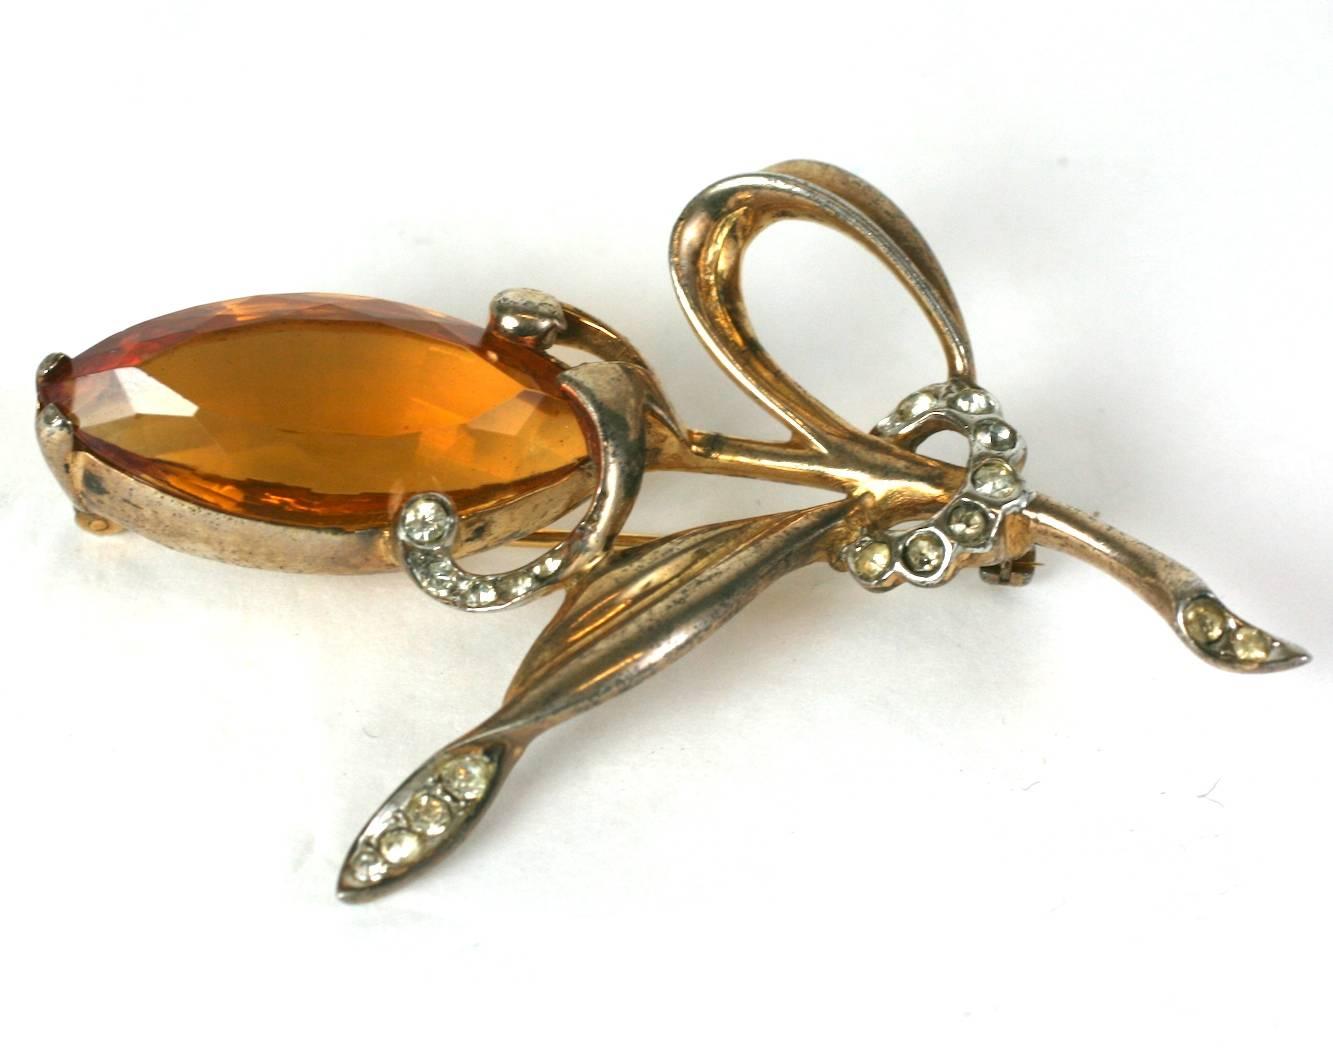 Charming Reja Retro Topaz Spray In Excellent Condition For Sale In New York, NY